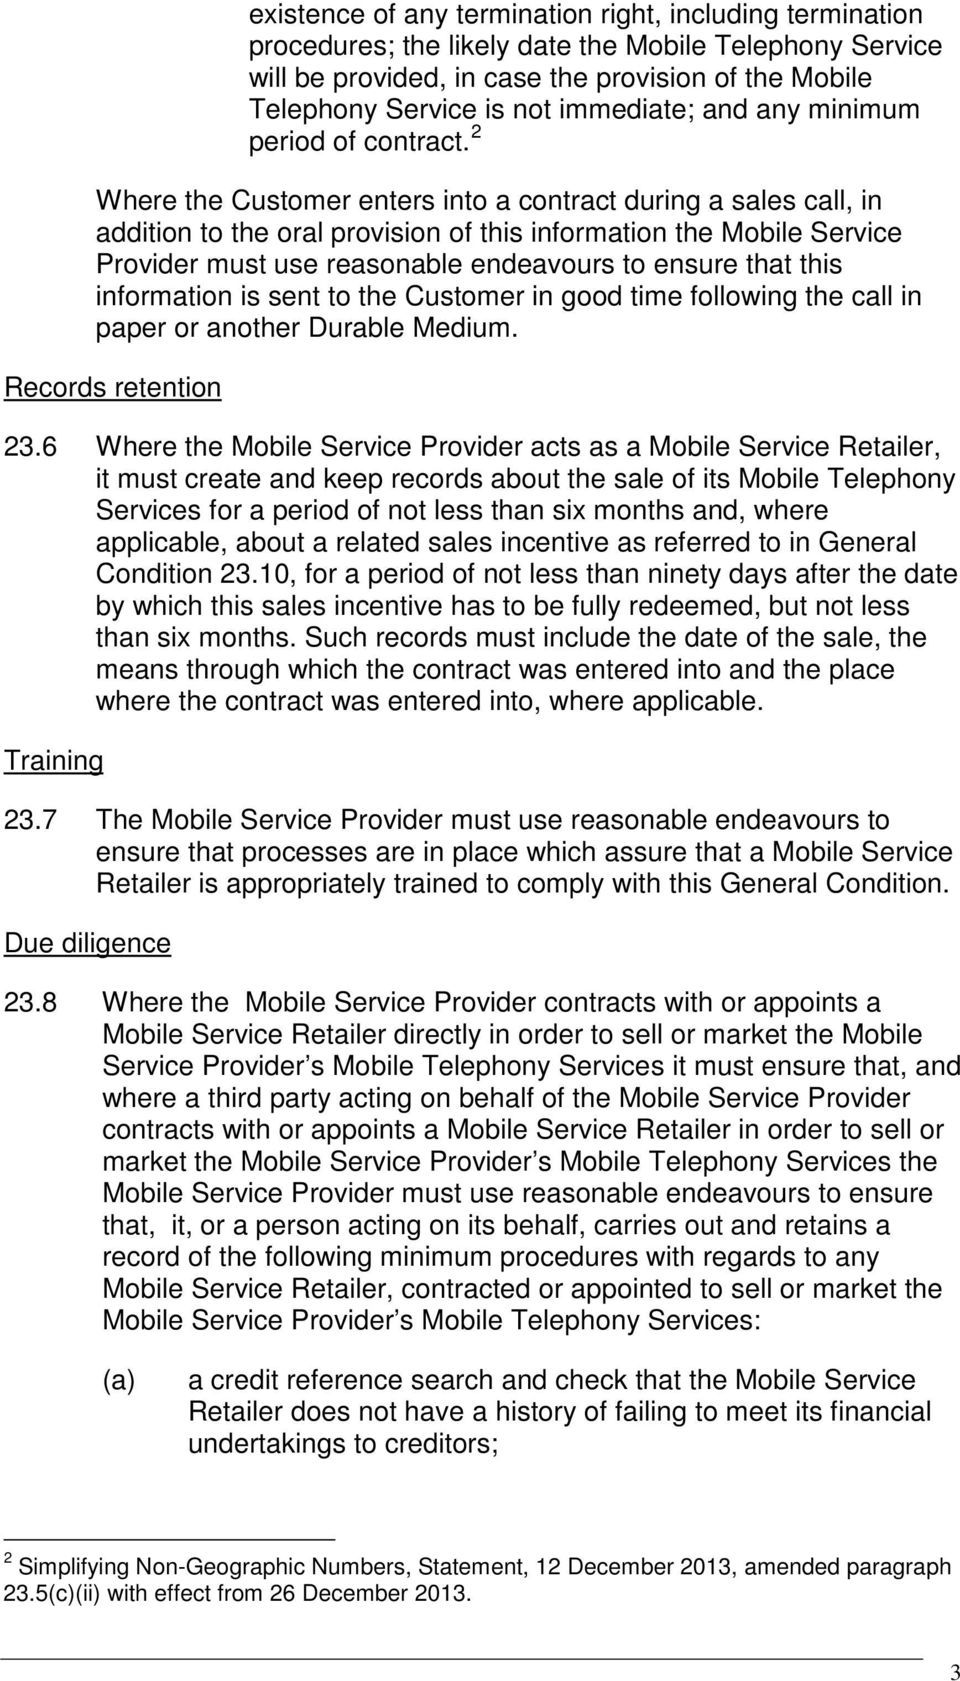 2 Where the Customer enters into a contract during a sales call, in addition to the oral provision of this information the Mobile Service Provider must use reasonable endeavours to ensure that this